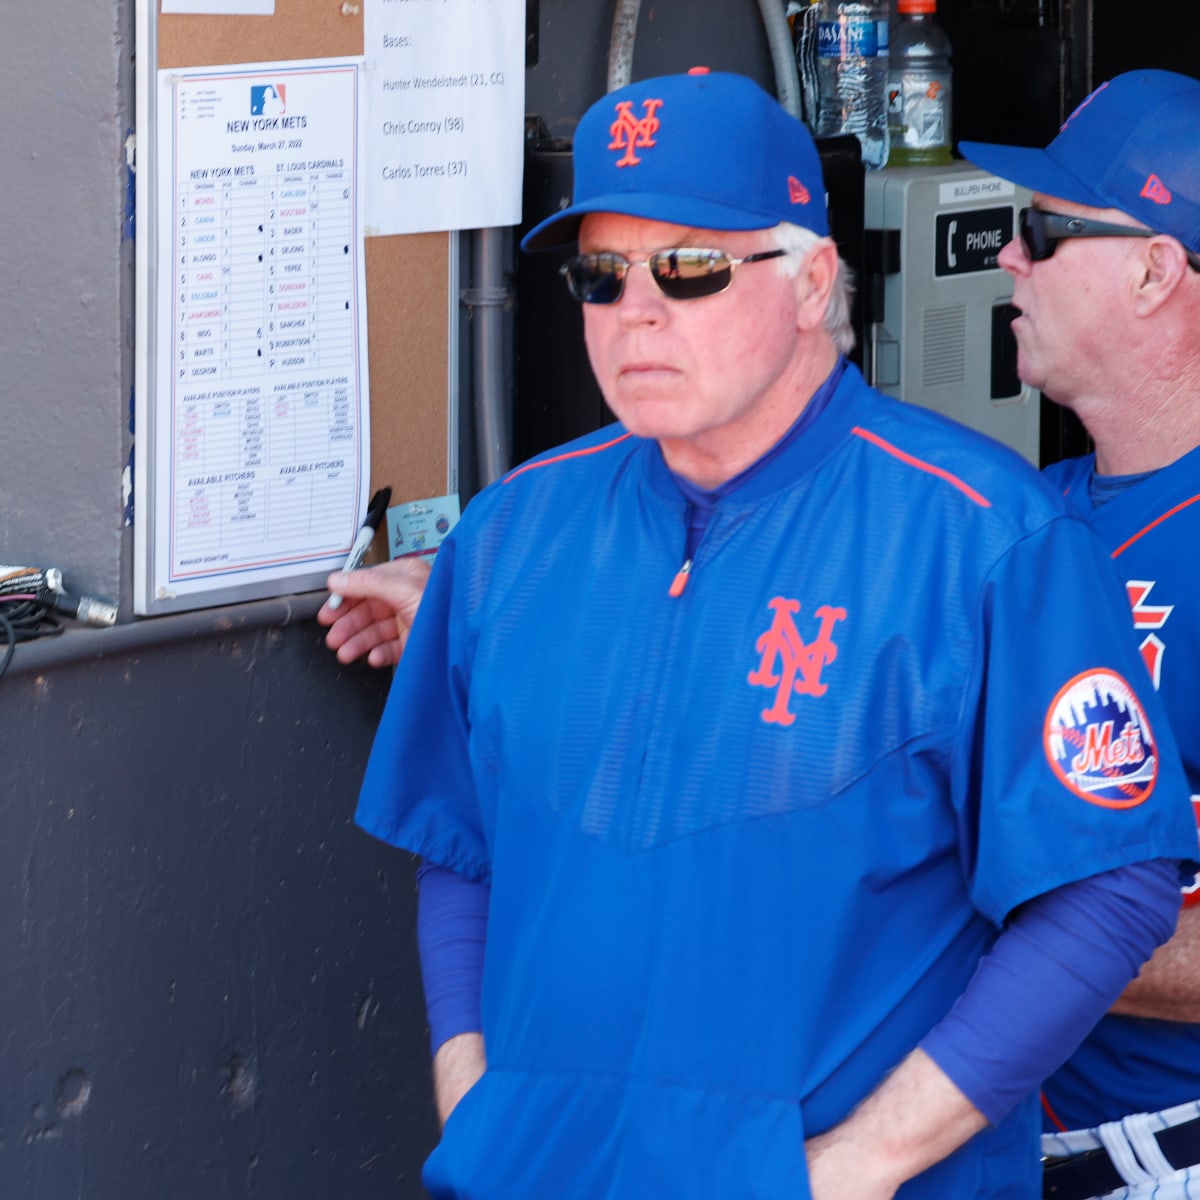 Century's Buck Showalter Out As New York Mets' Manager 